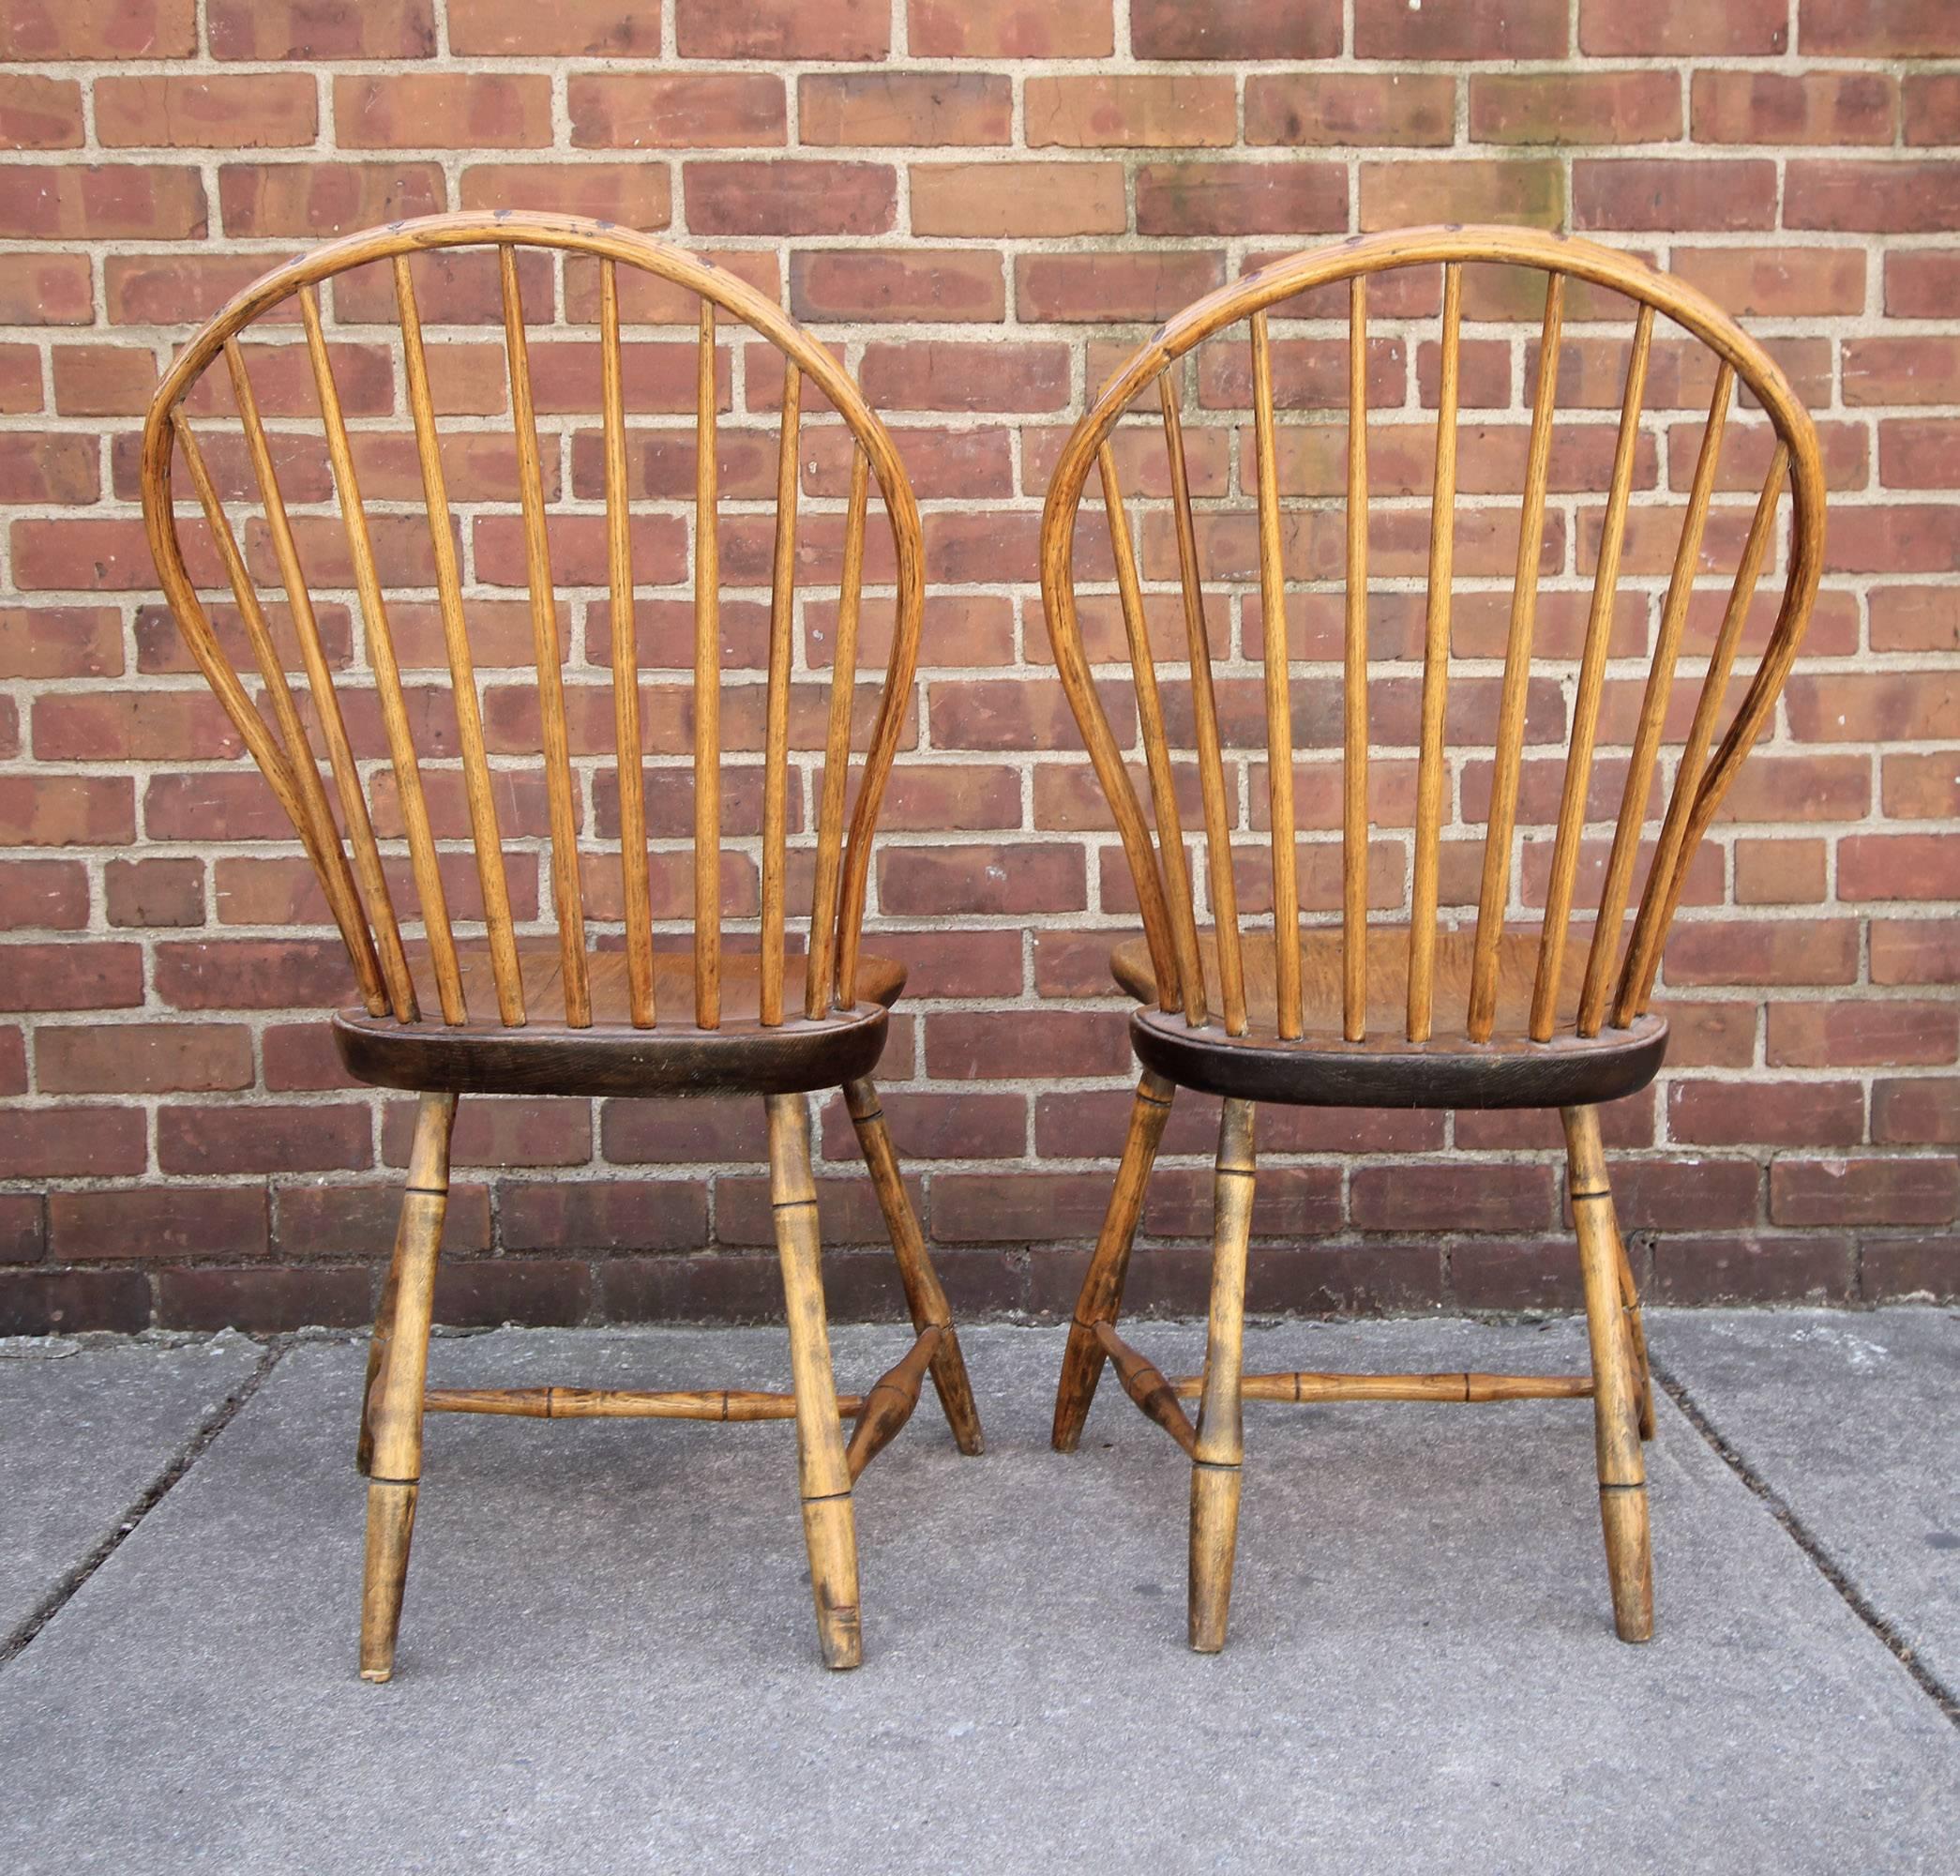 Pair of Bow-Back Windsor Chairs In Good Condition For Sale In Philadelphia, PA